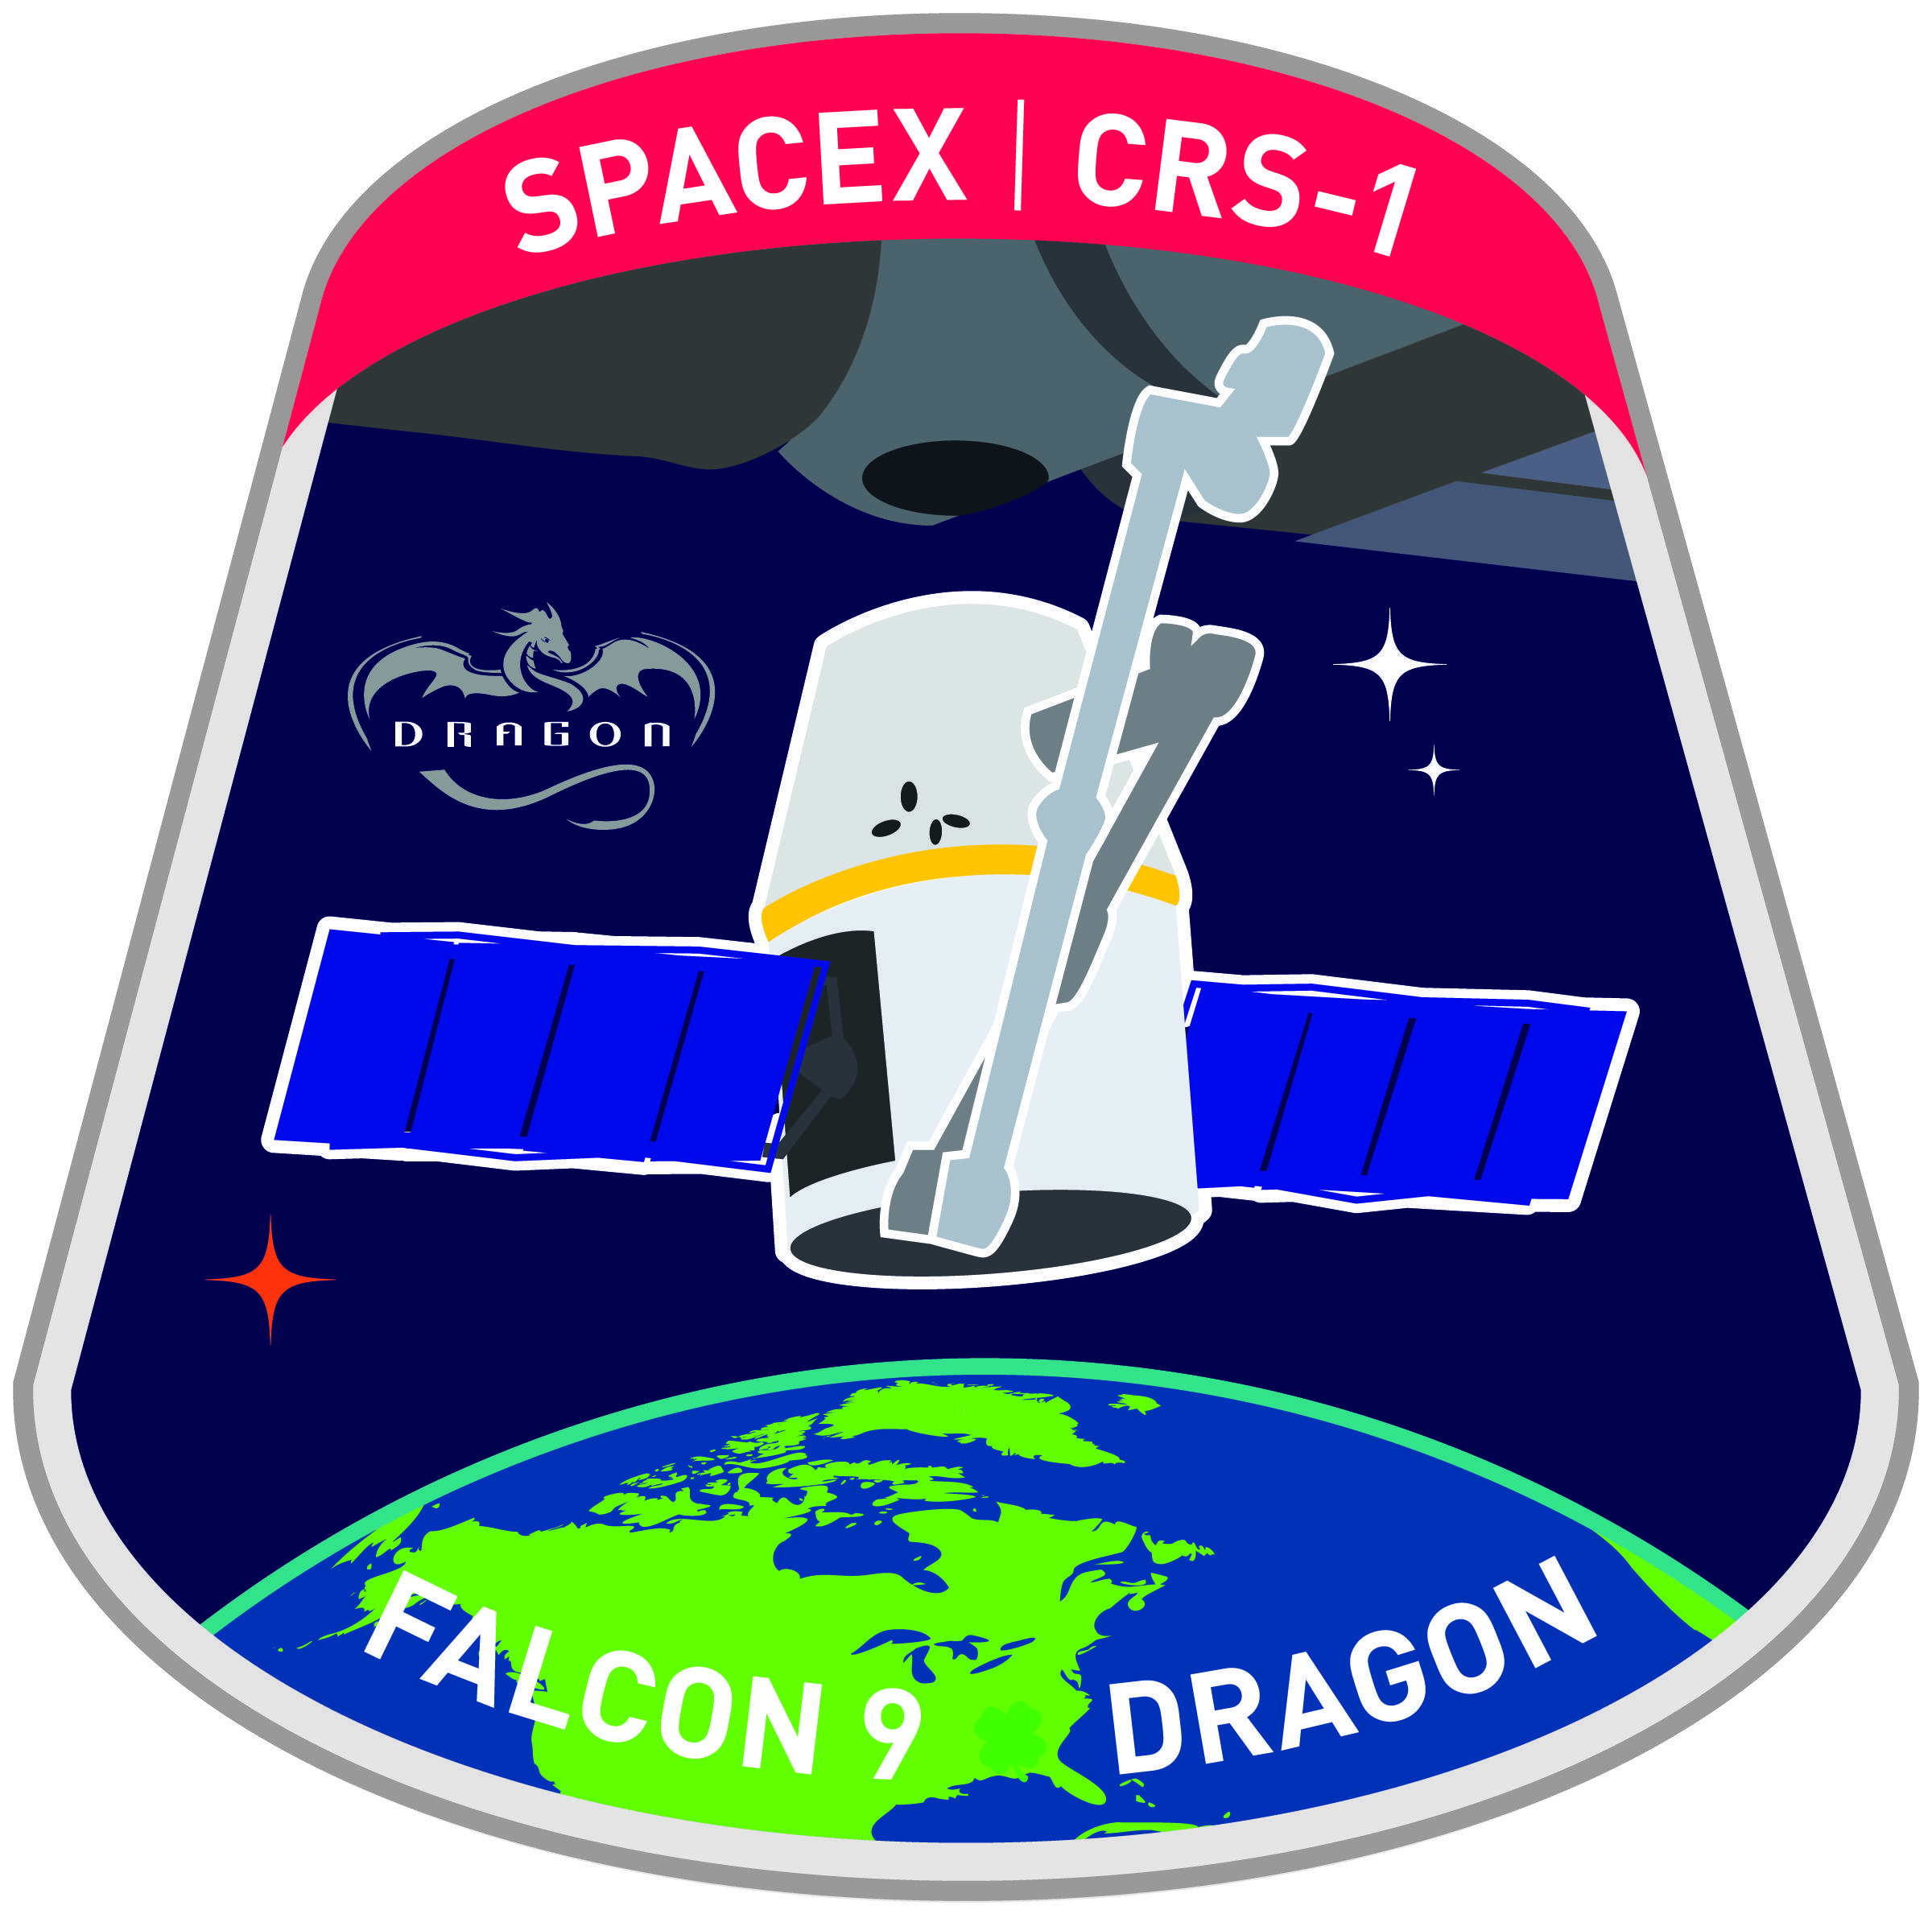 SpaceX Mission Logo - Summary of the First SpaceX Commercial Resupply Mission to ISS ...